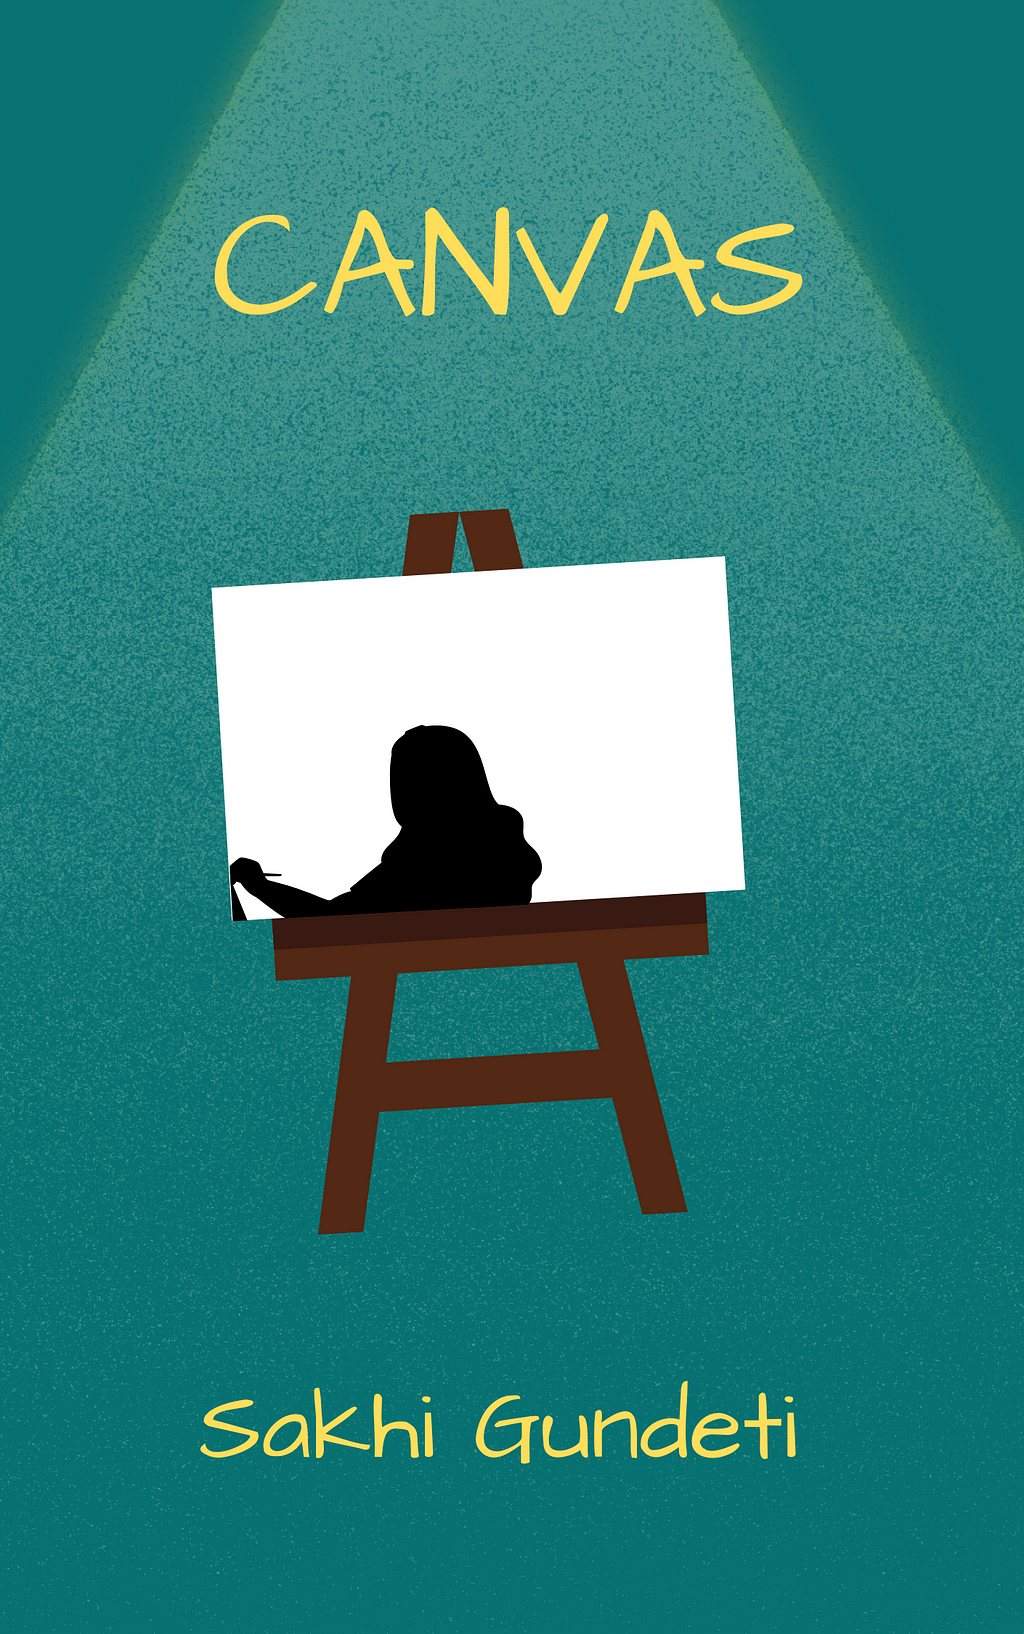 A canvas with a silhouette of a woman painting.